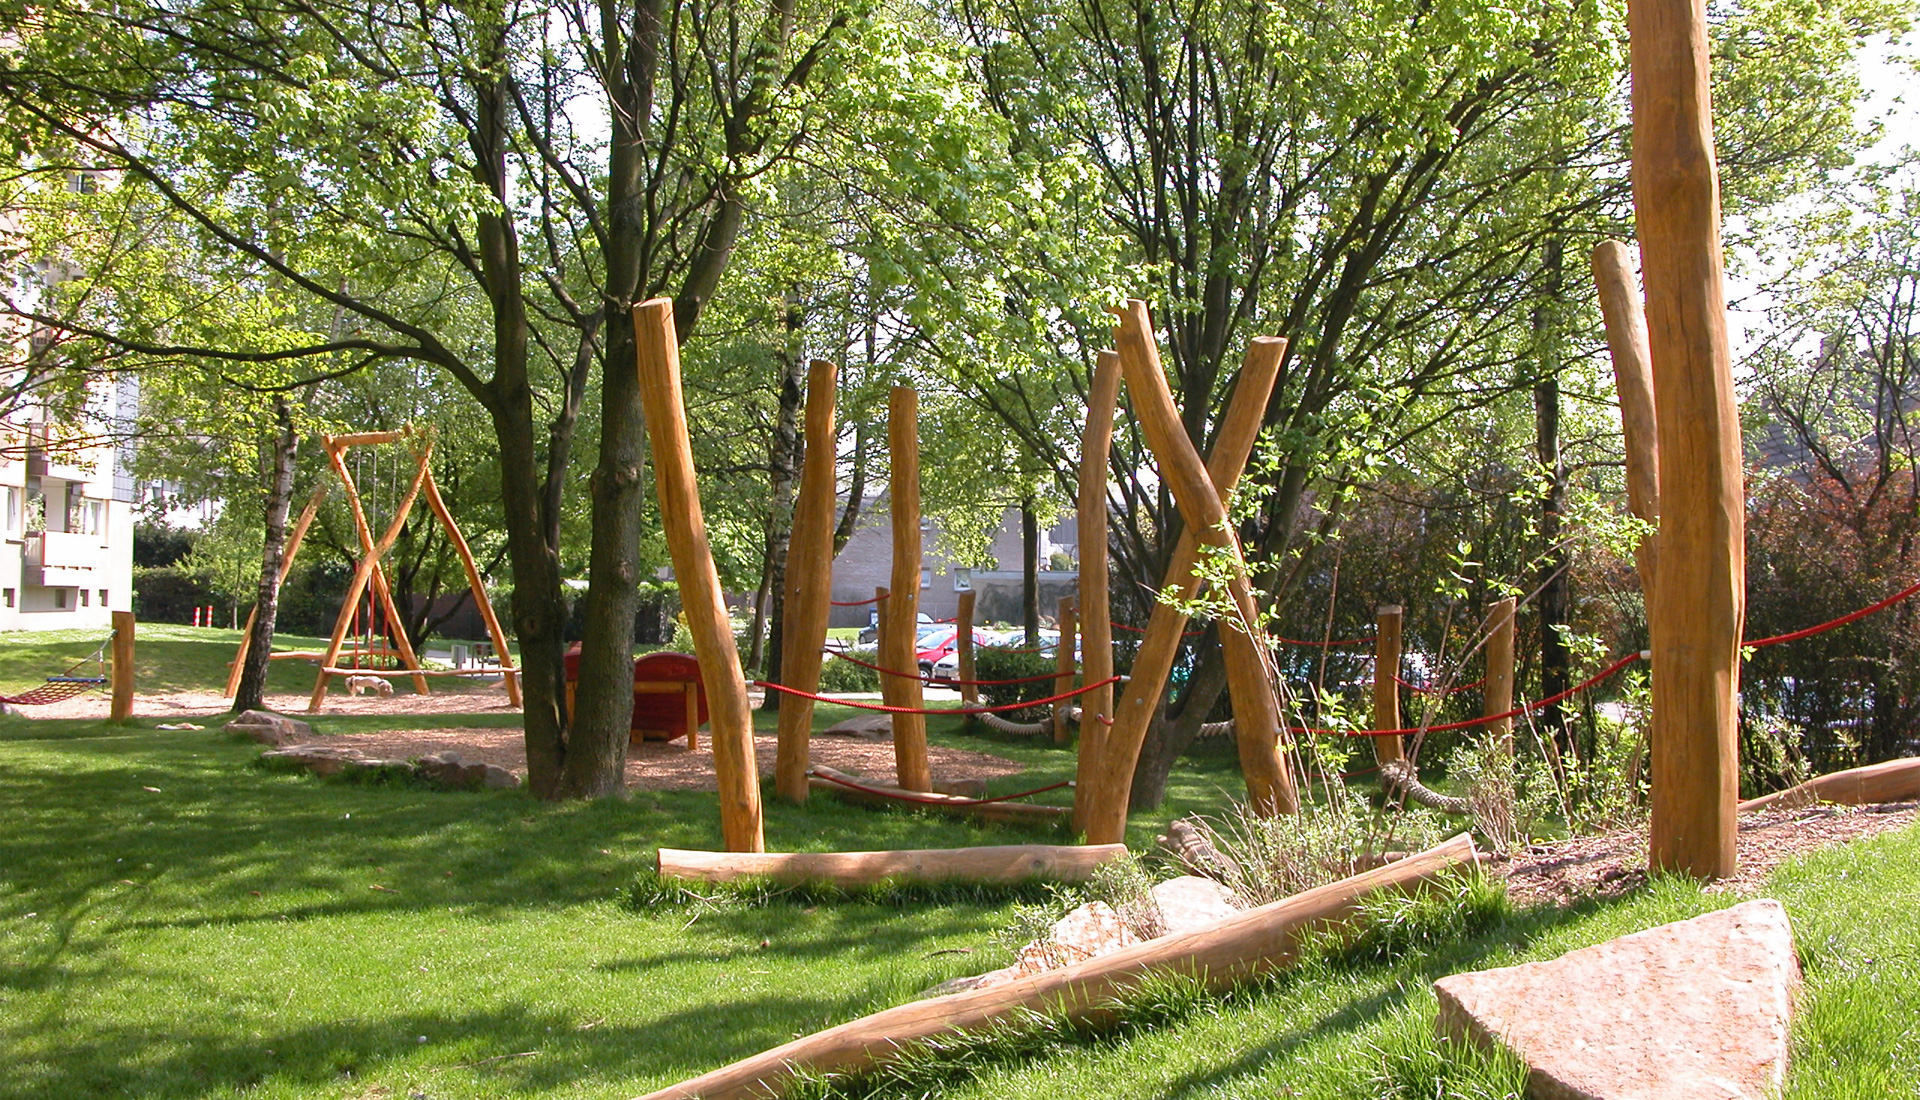 A play area with ropes strung between wooden posts.